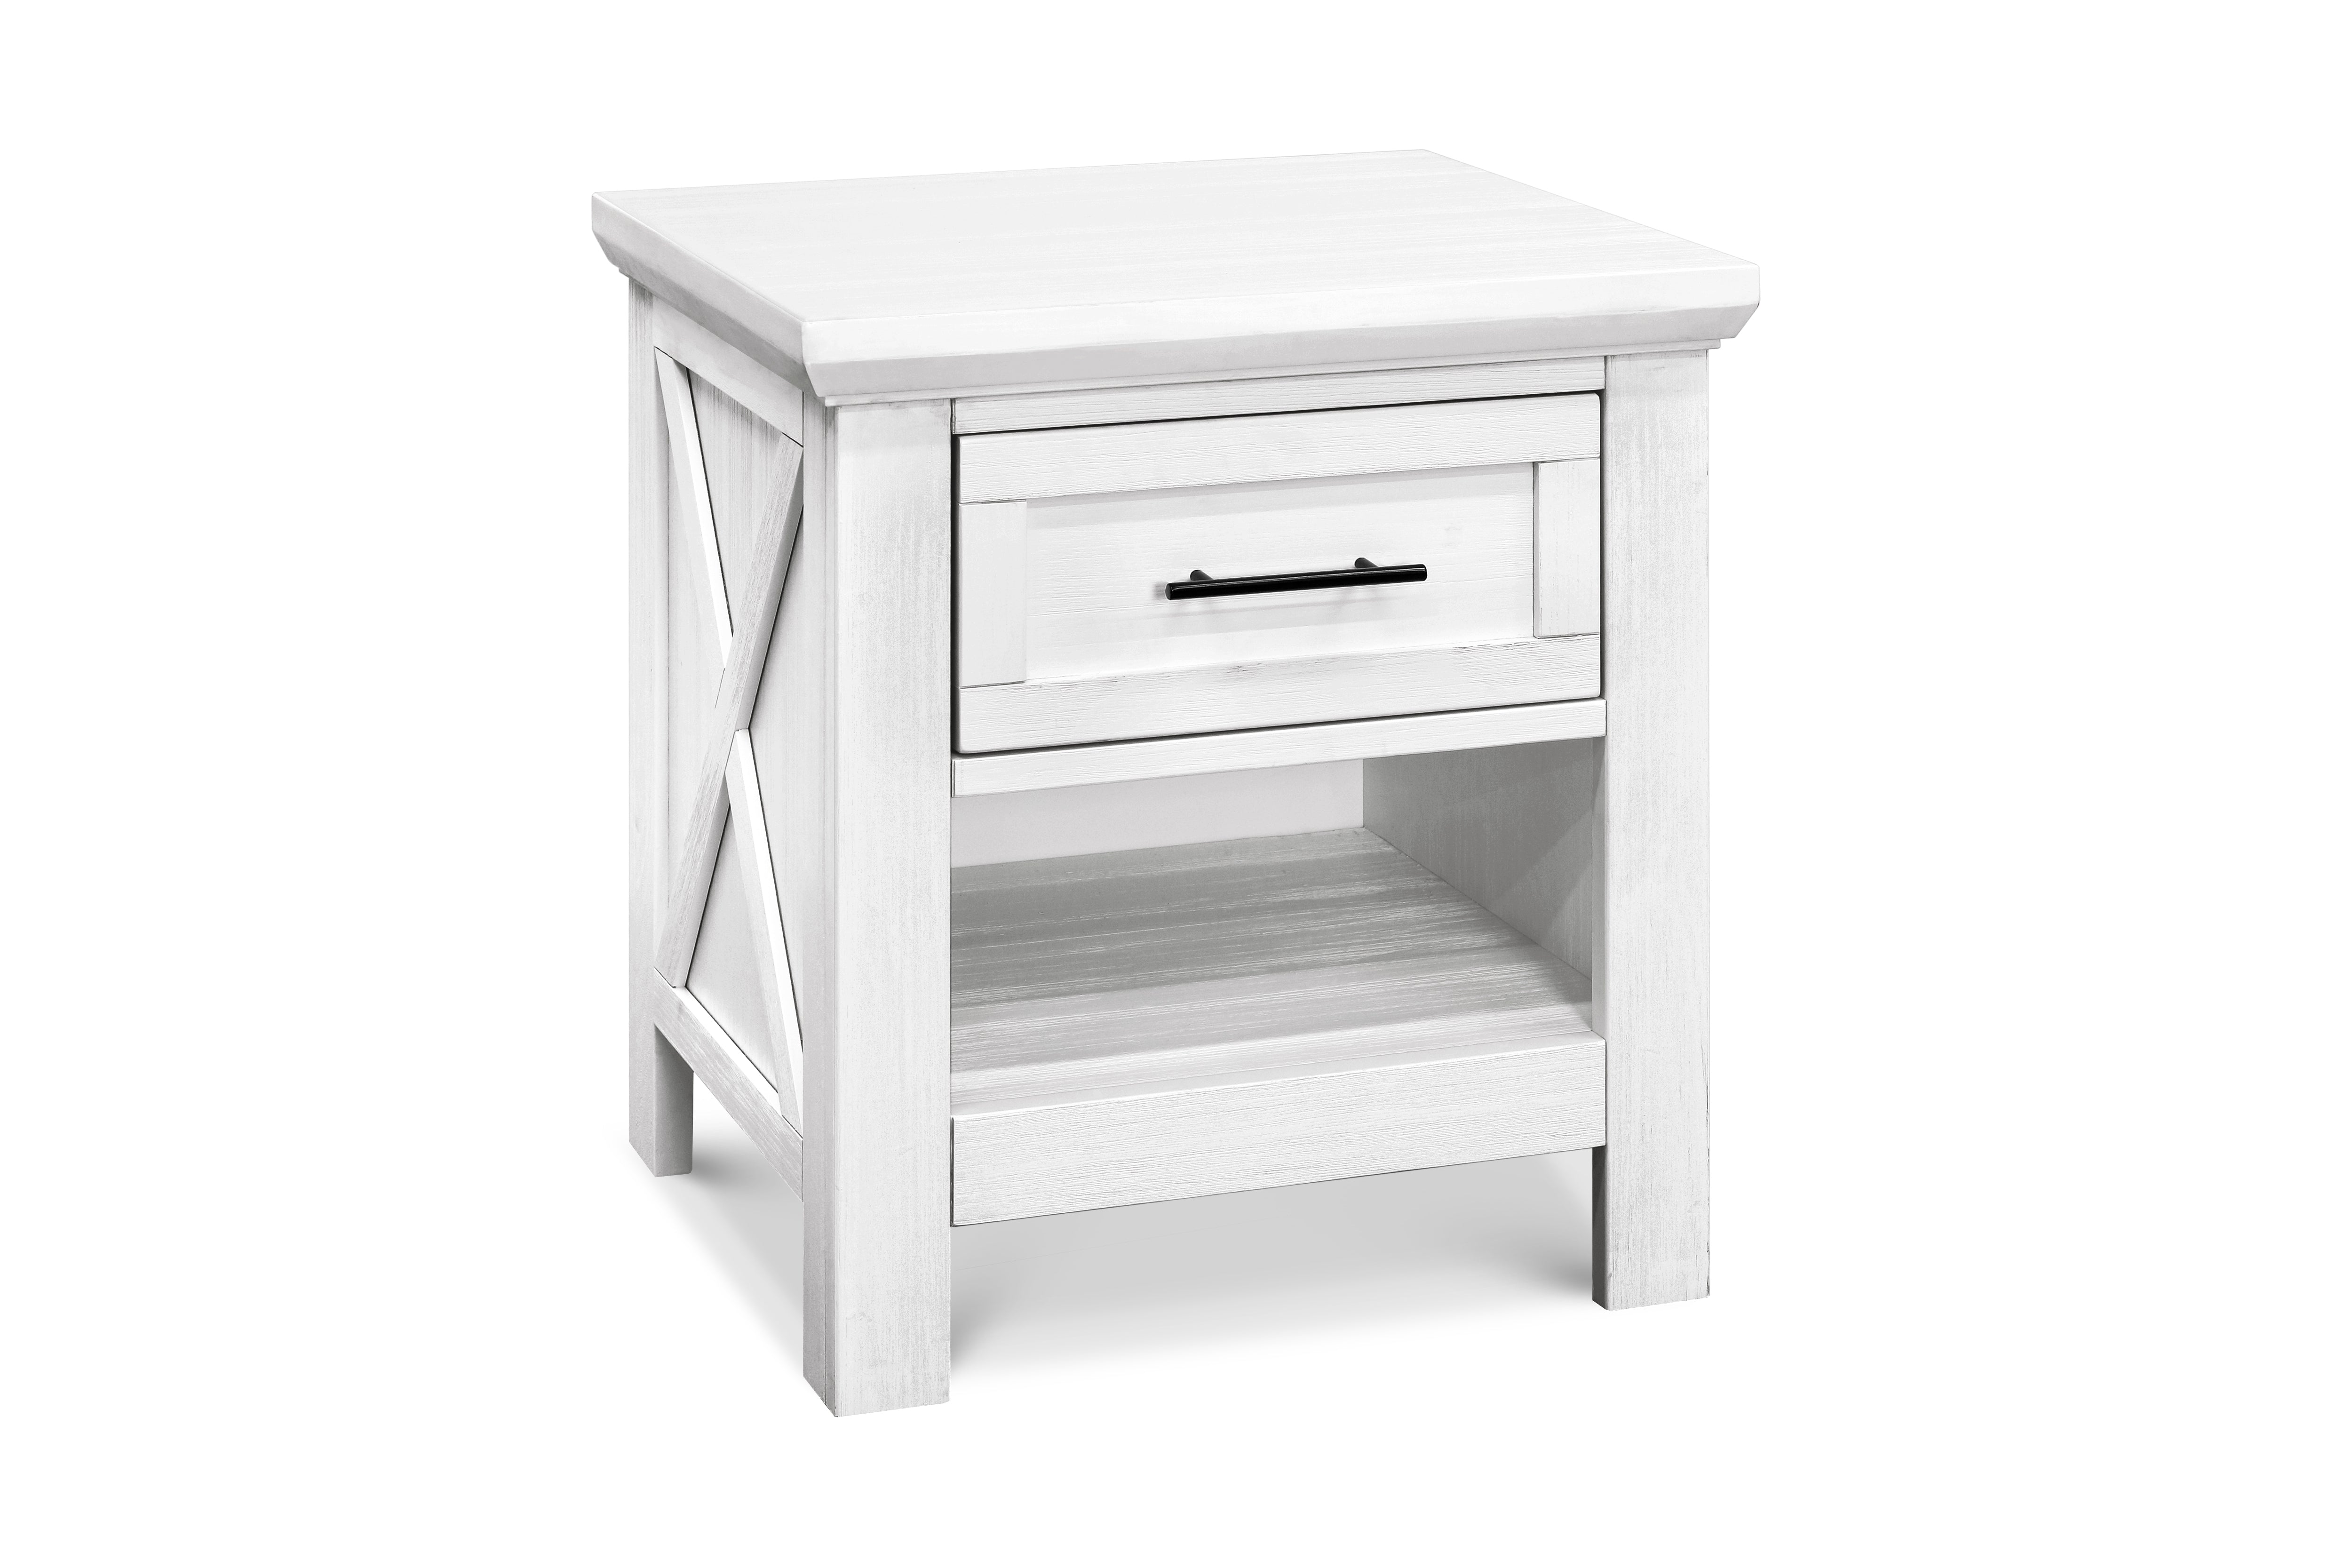 Emory nightstand in linen white